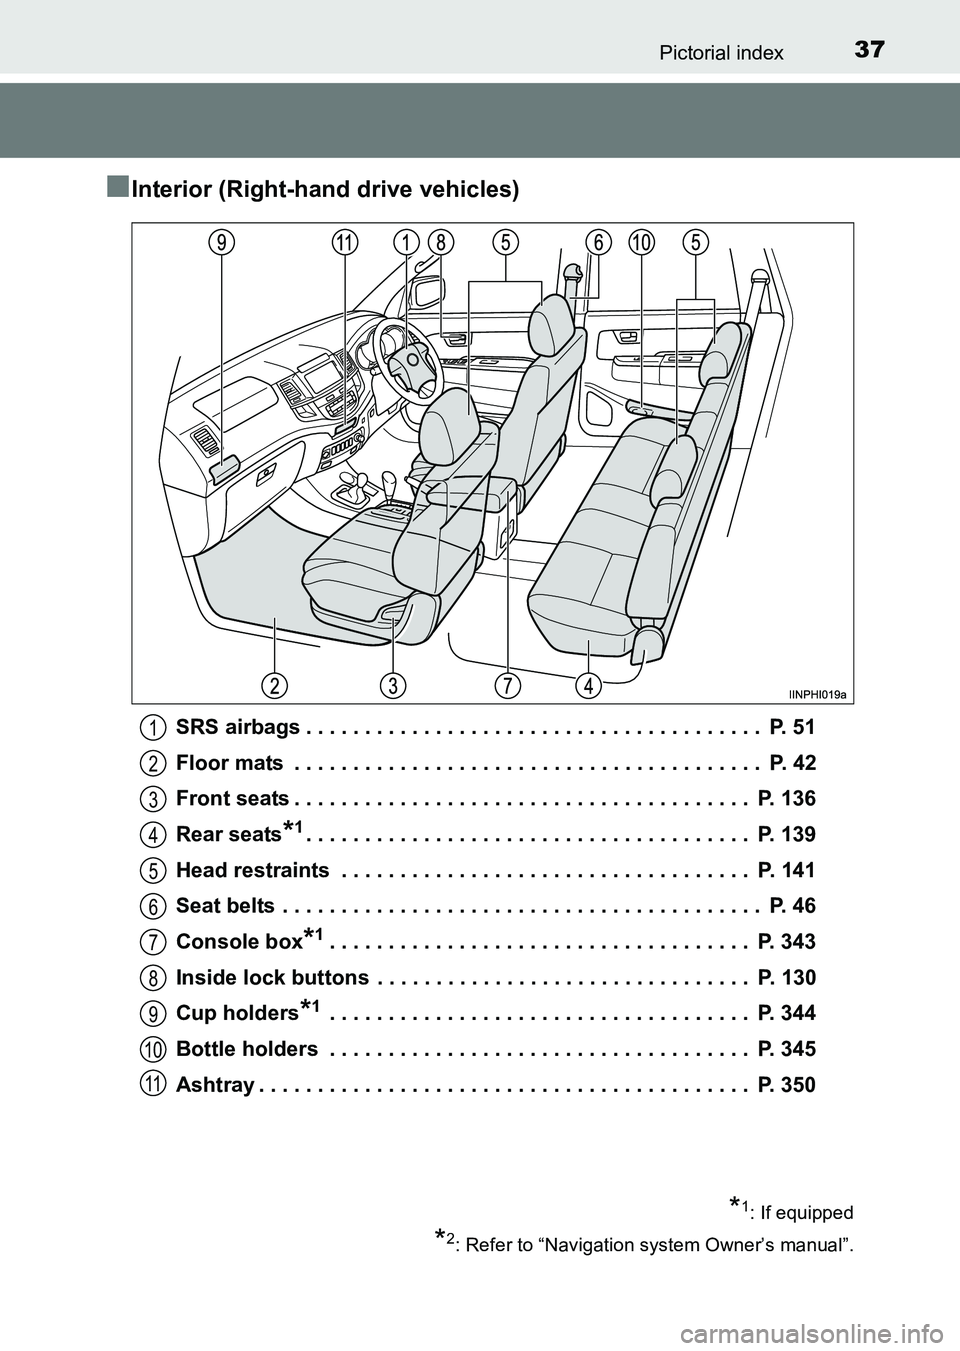 TOYOTA HILUX 2015  Owners Manual (in English) 37Pictorial index
HILUX_OM_OM0K219E_(EE)
■Interior (Right-hand drive vehicles)
SRS airbags . . . . . . . . . . . . . . . . . . . . . . . . . . . . . . . . . . . . . . .  P. 51
Floor mats  . . . . . 